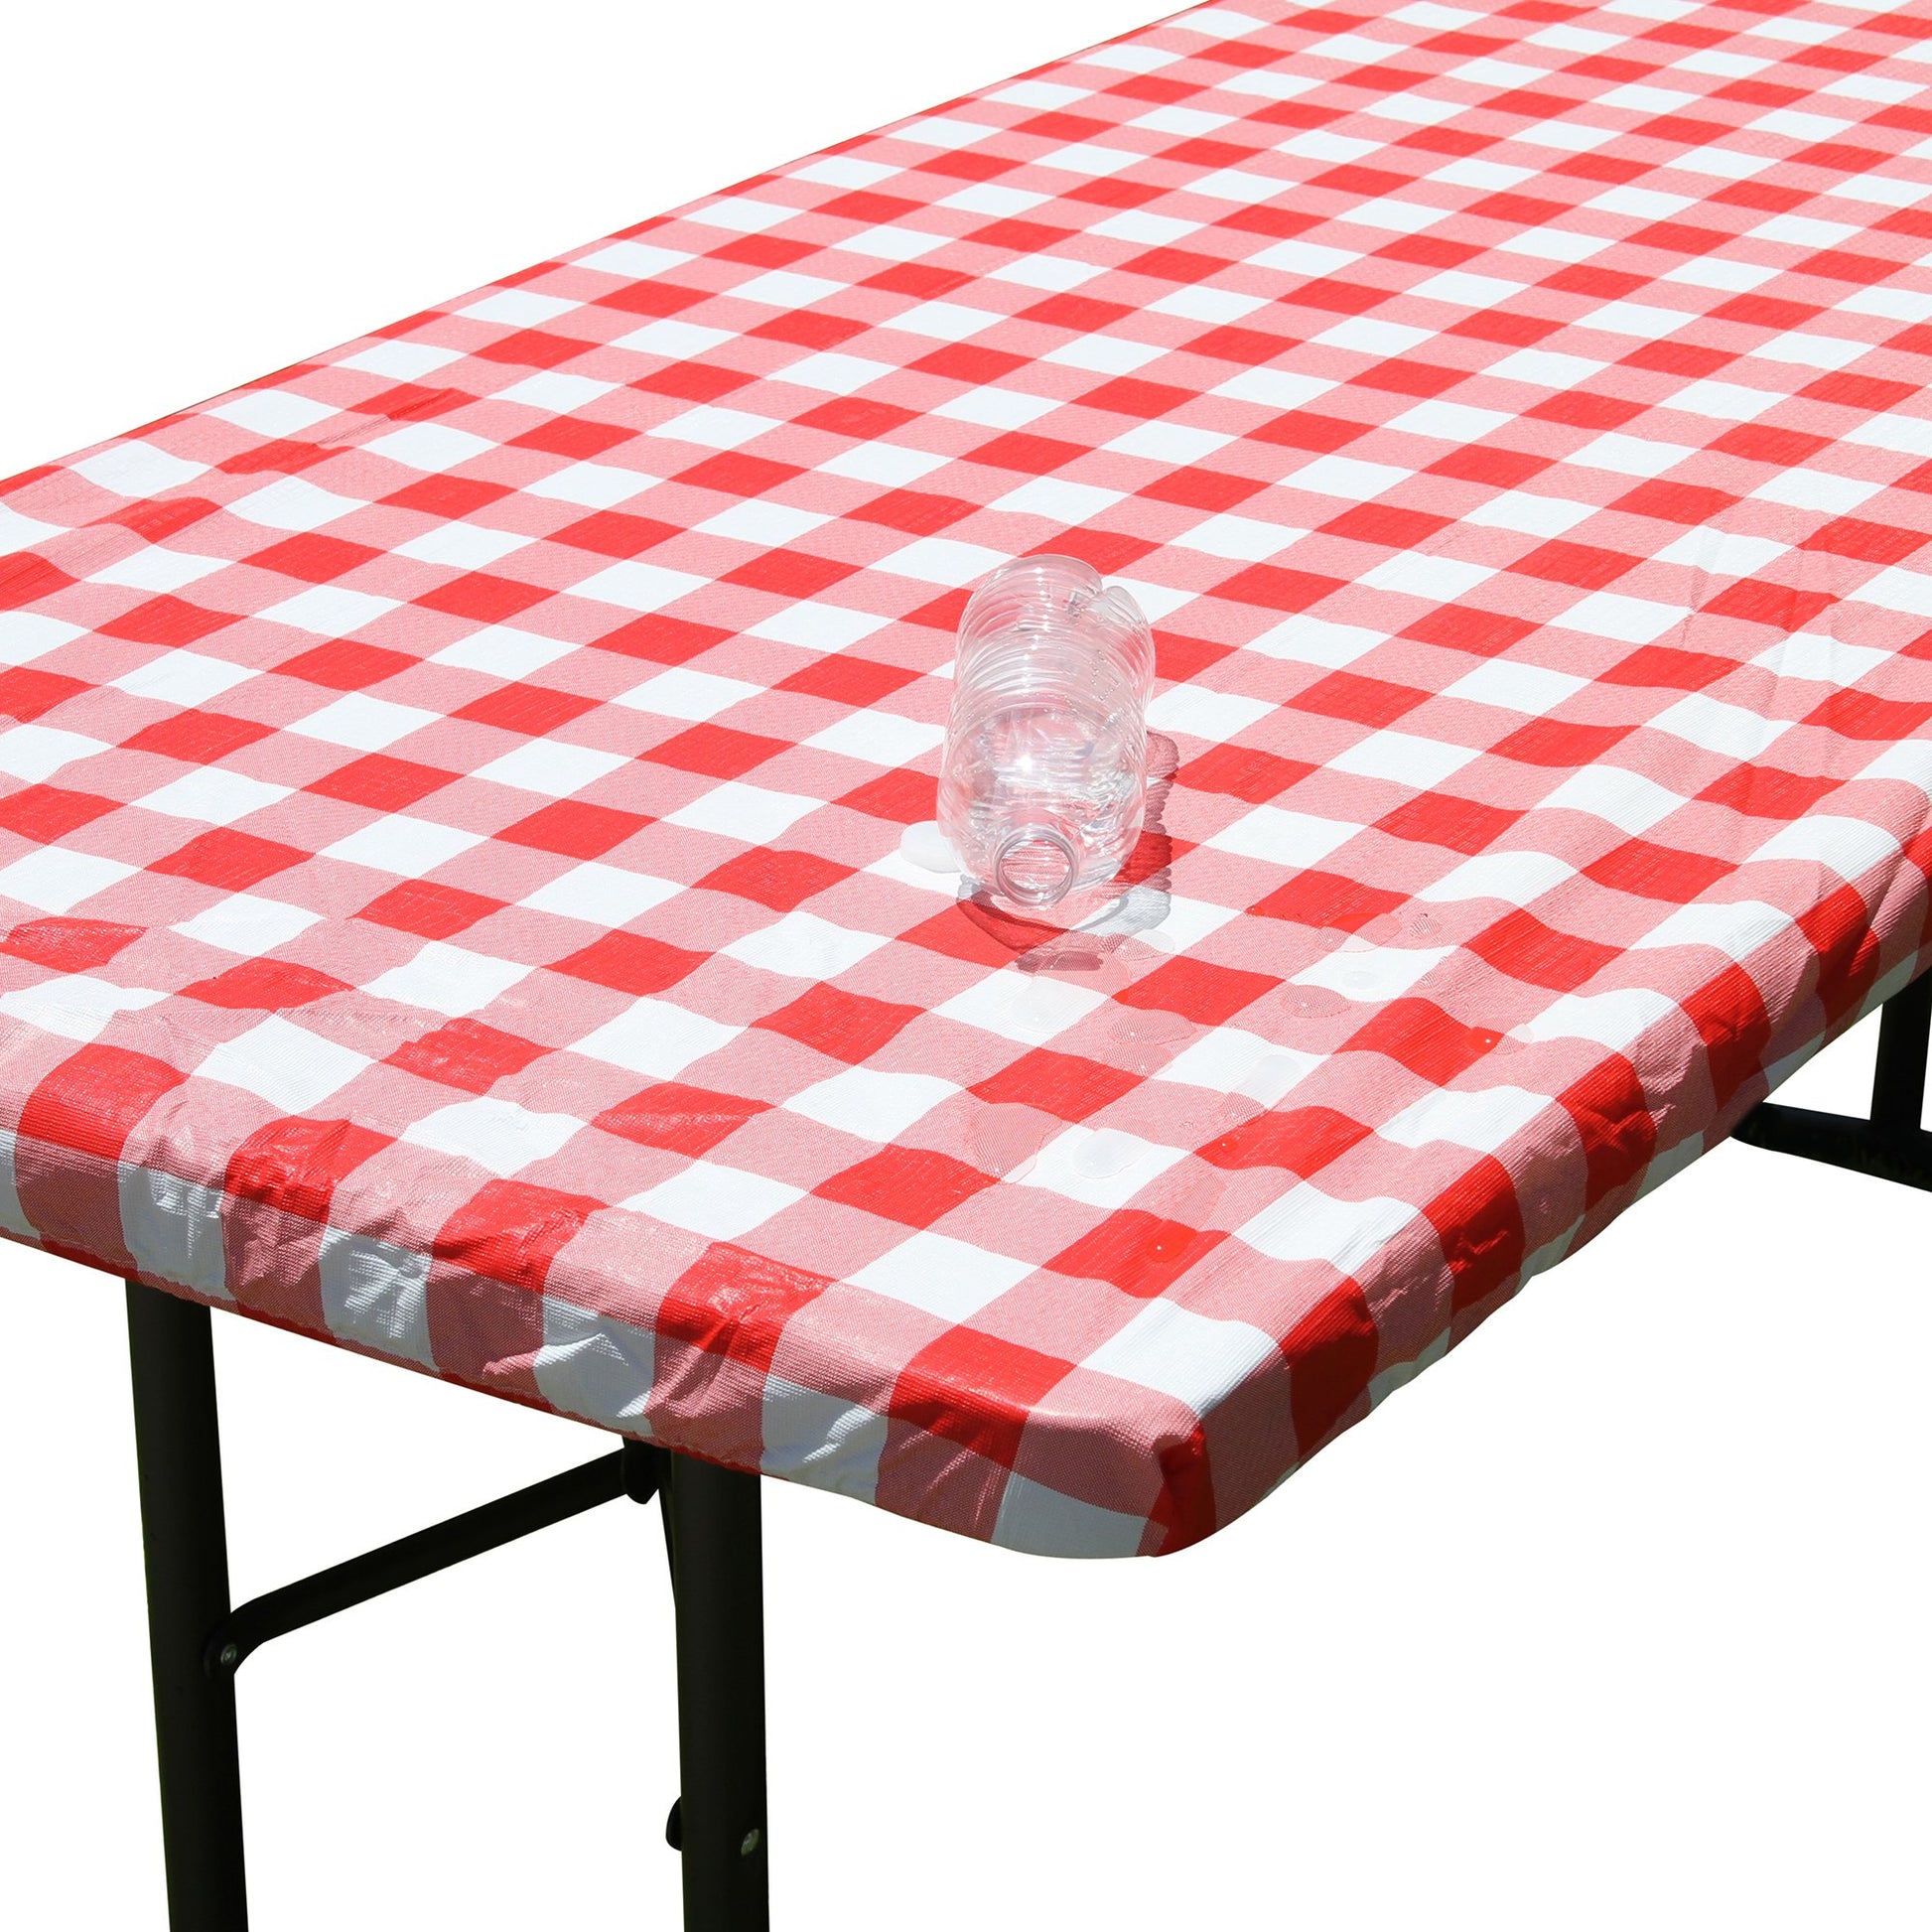 Water beading up on the water resistant surface of TableCloth PLUS 72" Checkerboard Red and White Fitted Polyester Tablecloth for 6' Folding Tables